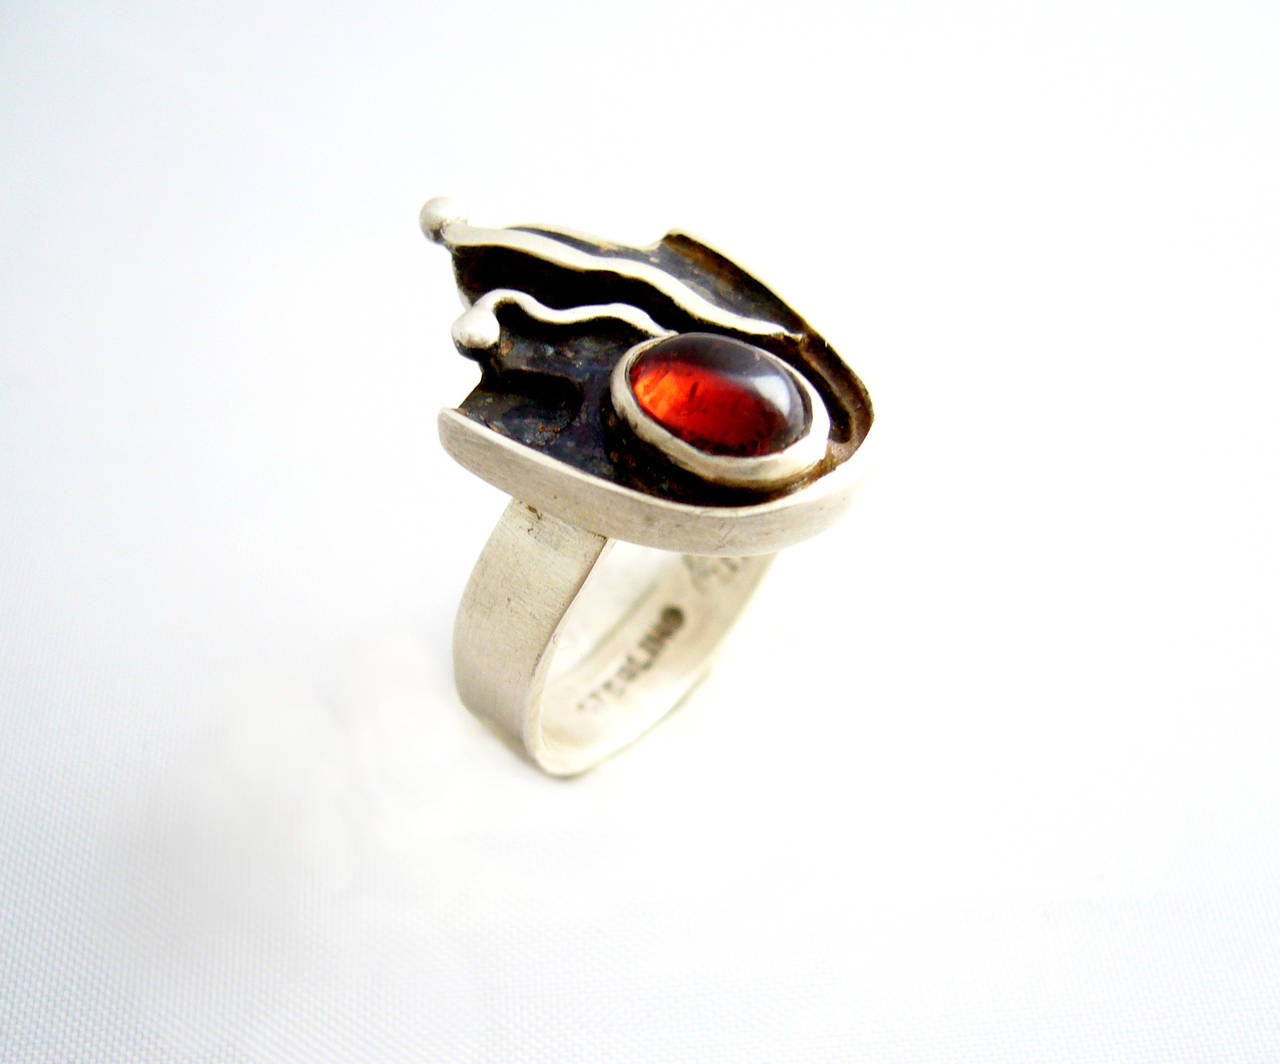 A rare, sterling silver and garnet cabochon ring created by Sam Kramer of New York, circa 1950.  Ring is a finger size 7.  Signed Sterling along with the Kramer hallmark of a mushroom.  In very good vintage condition. 

Kramer's studio was located